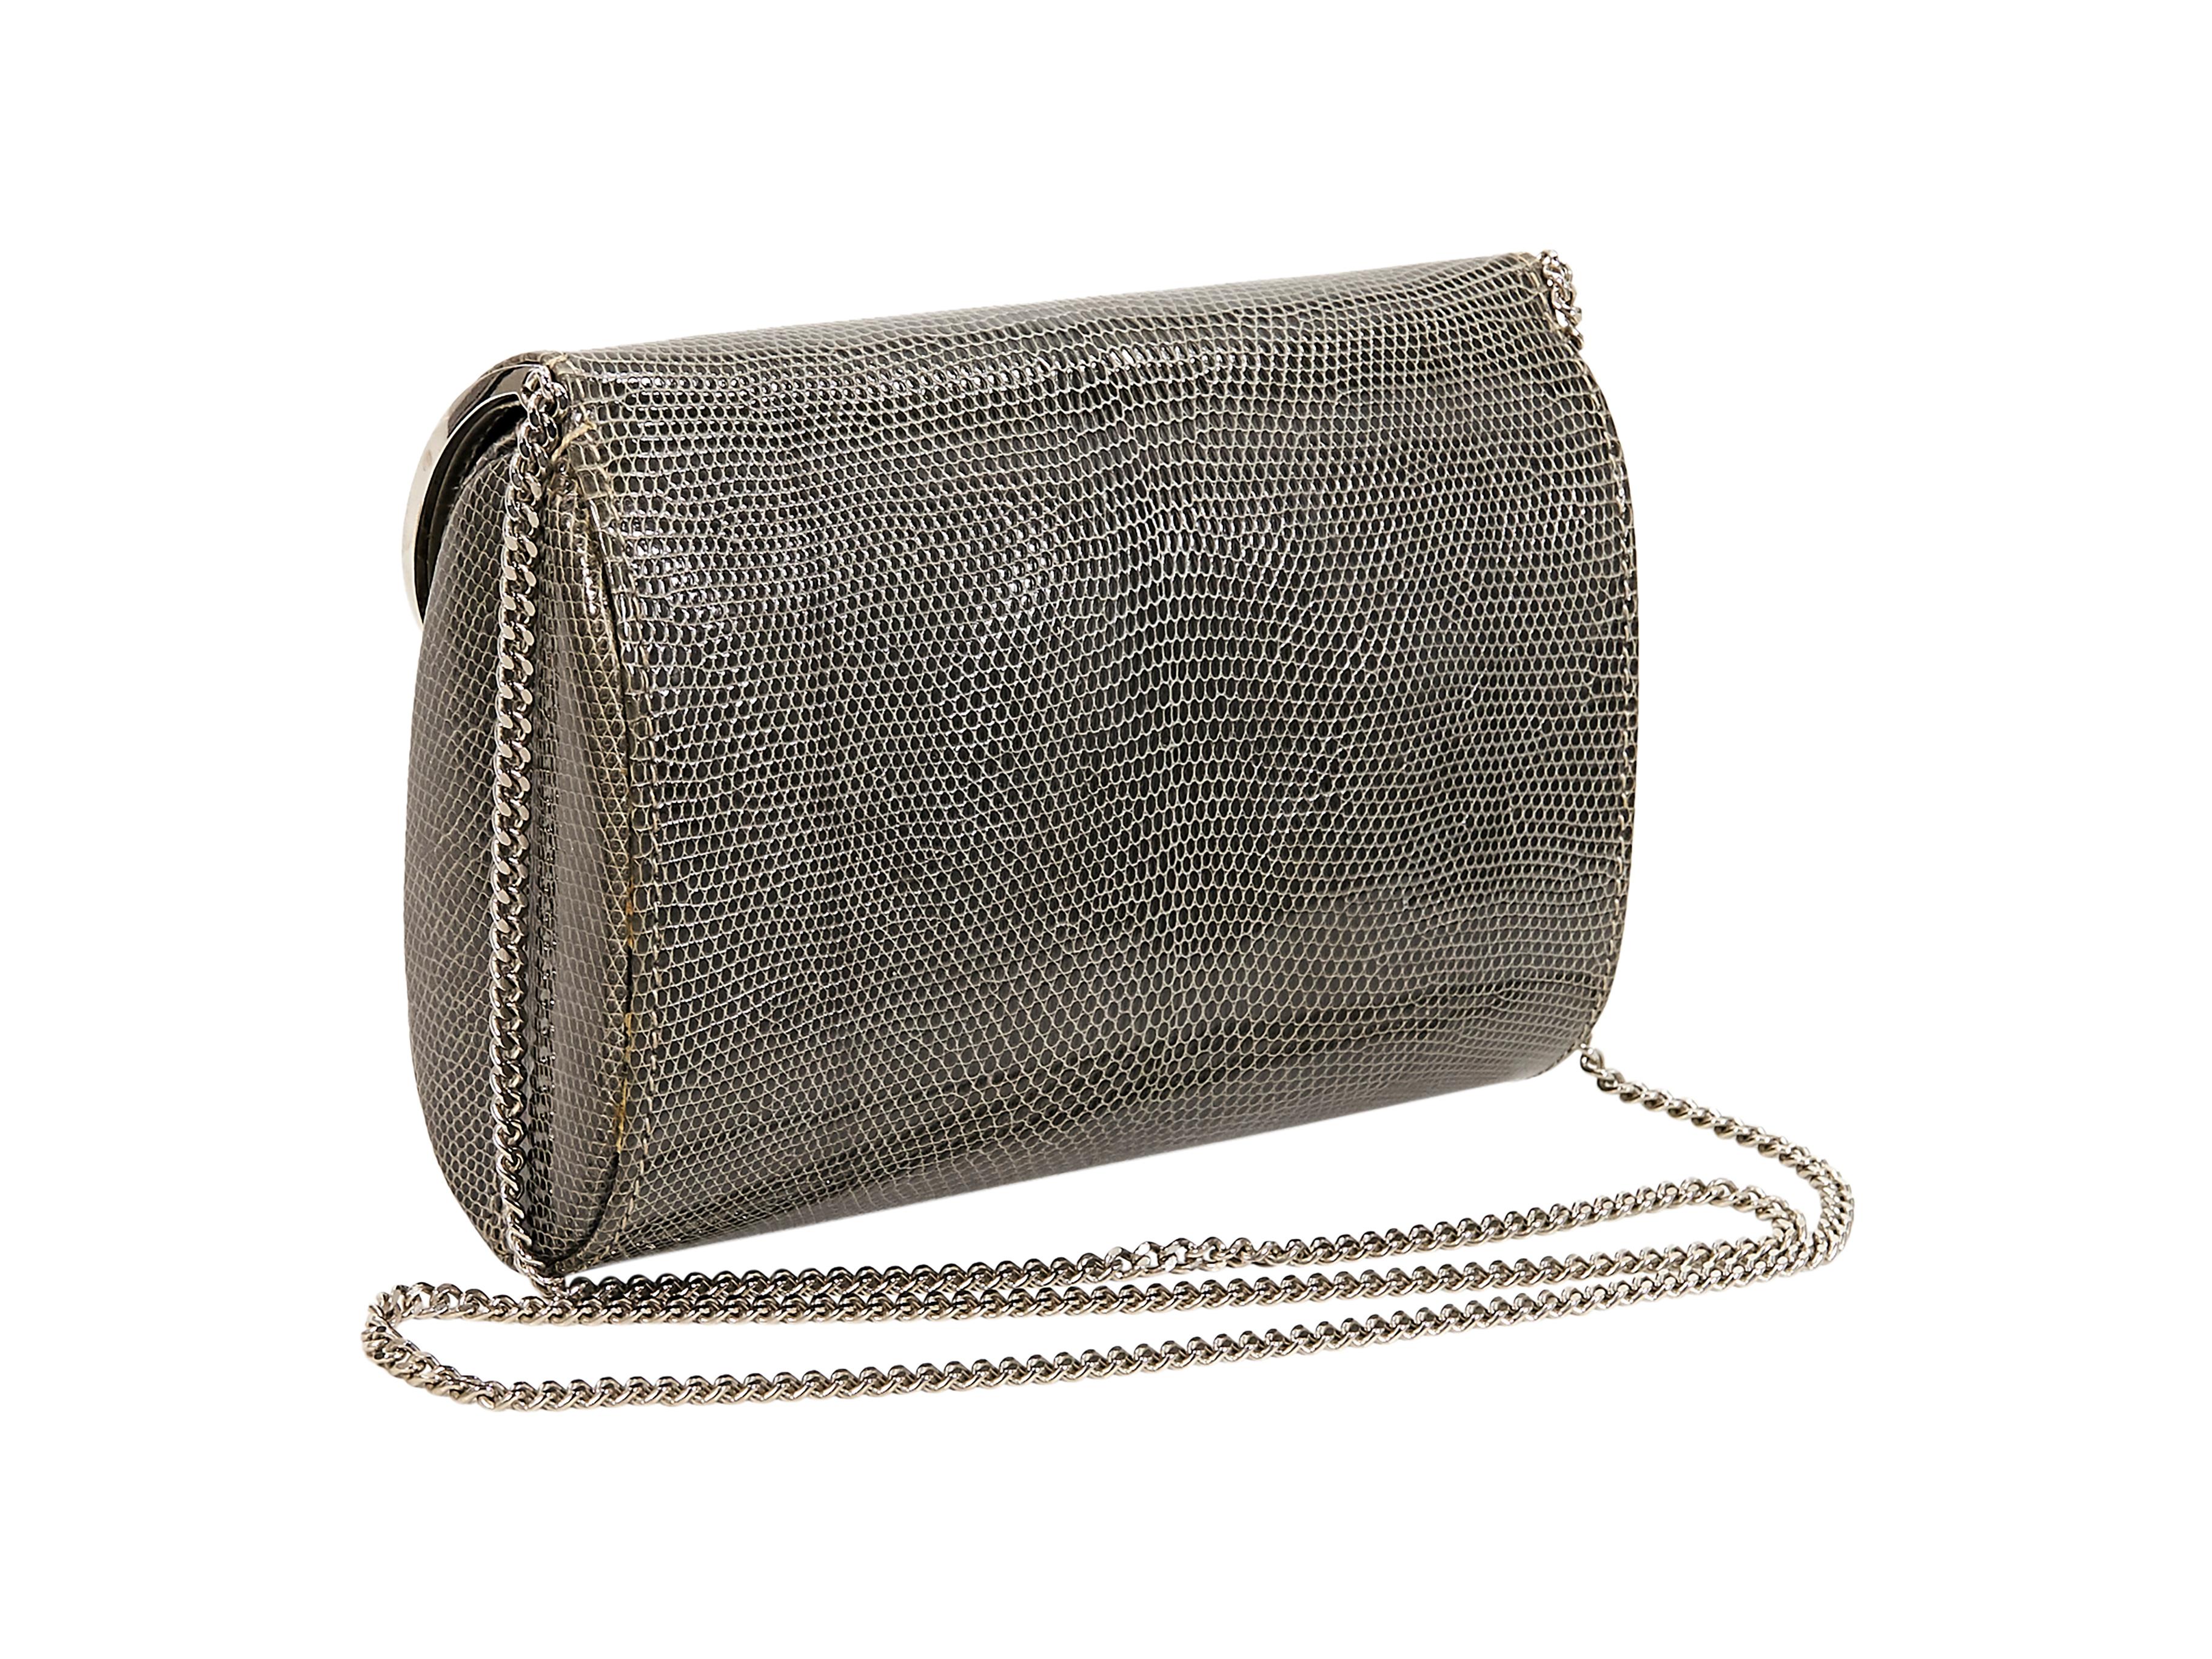 Product details:  Vintage grey lizard skin crossbody bag by Gucci.  Circa the 1980s.  Tuck-away chain crossbody strap.  Lined interior with inner slide pocket.  Silvertone hardware.  7